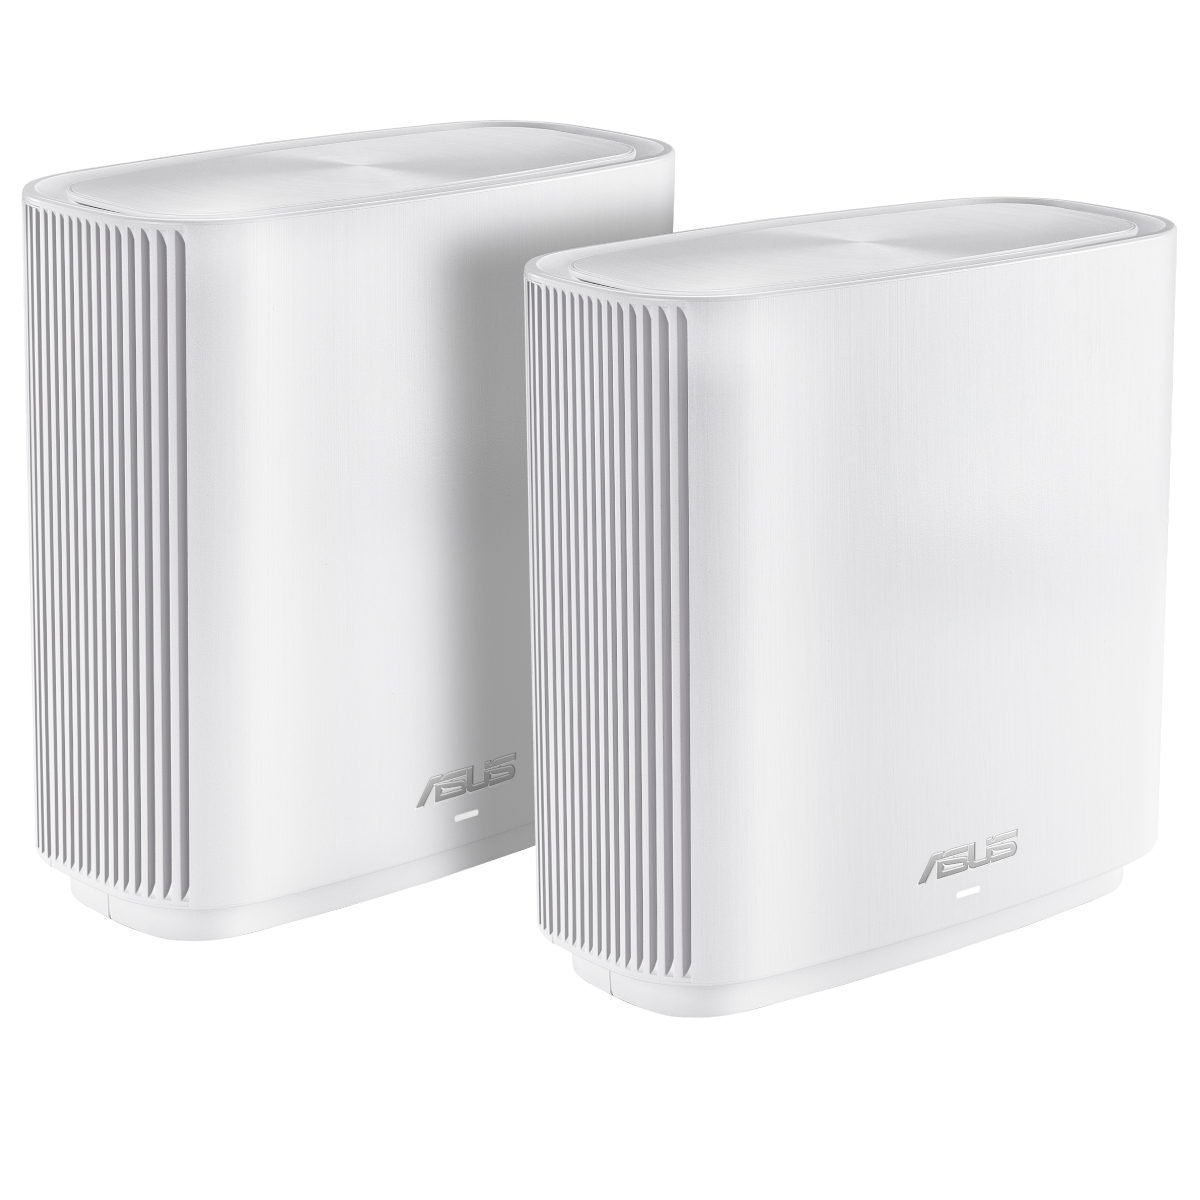 ASUS ZenWifi AC (CT8) AC3000 WiFi 5 Mesh System Pack of 2 - White